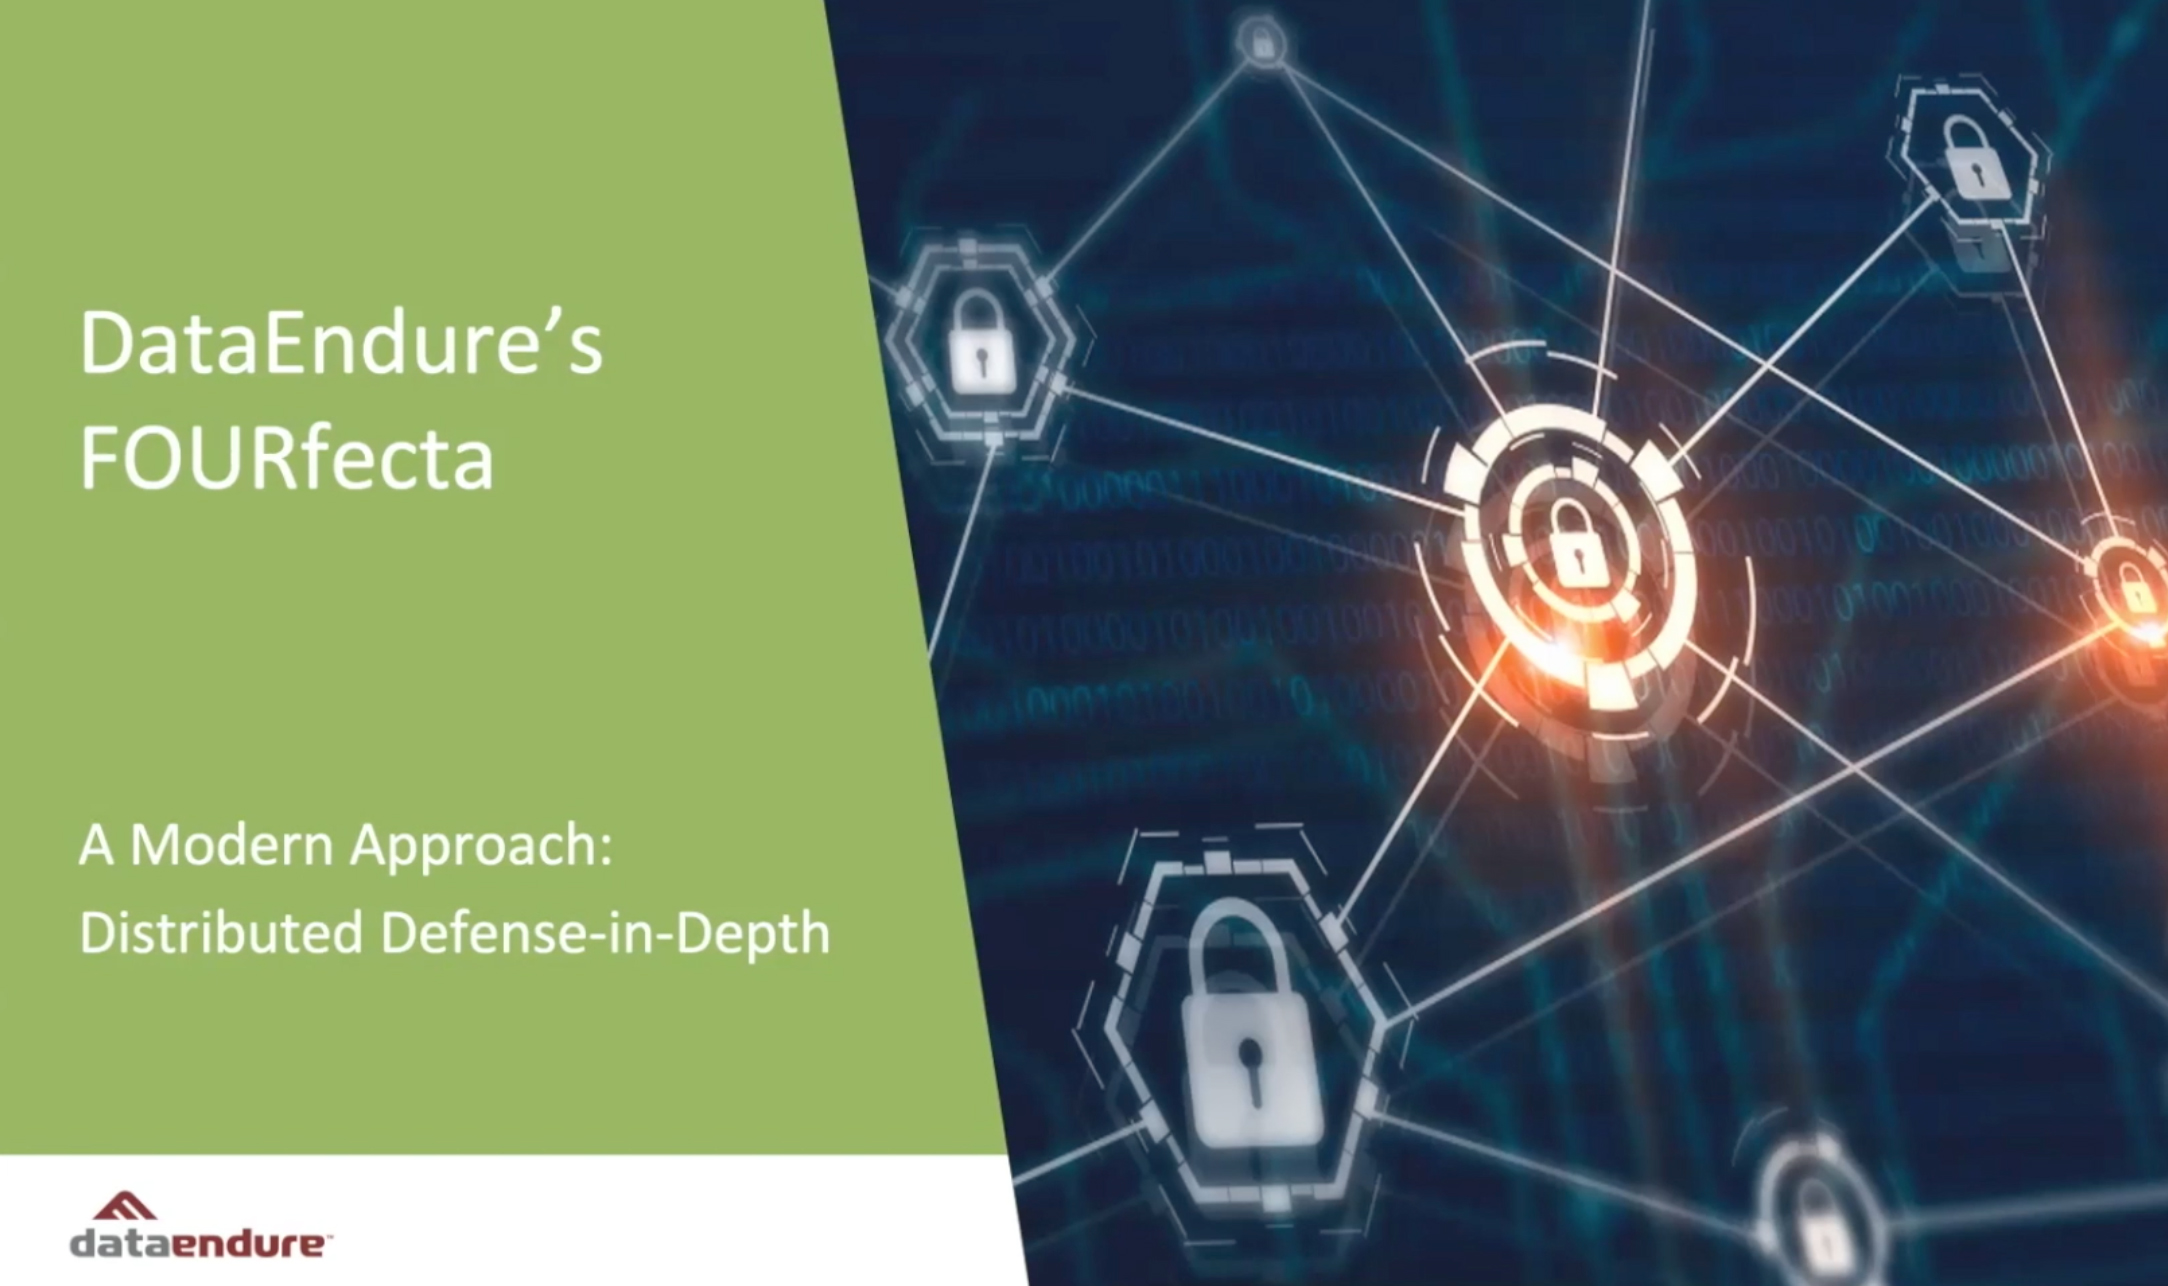 Nov. 2020 TECH talk Special Edition: A Modern Approach to Distributed Defense in Depth (Part 4 of the FourFecta)